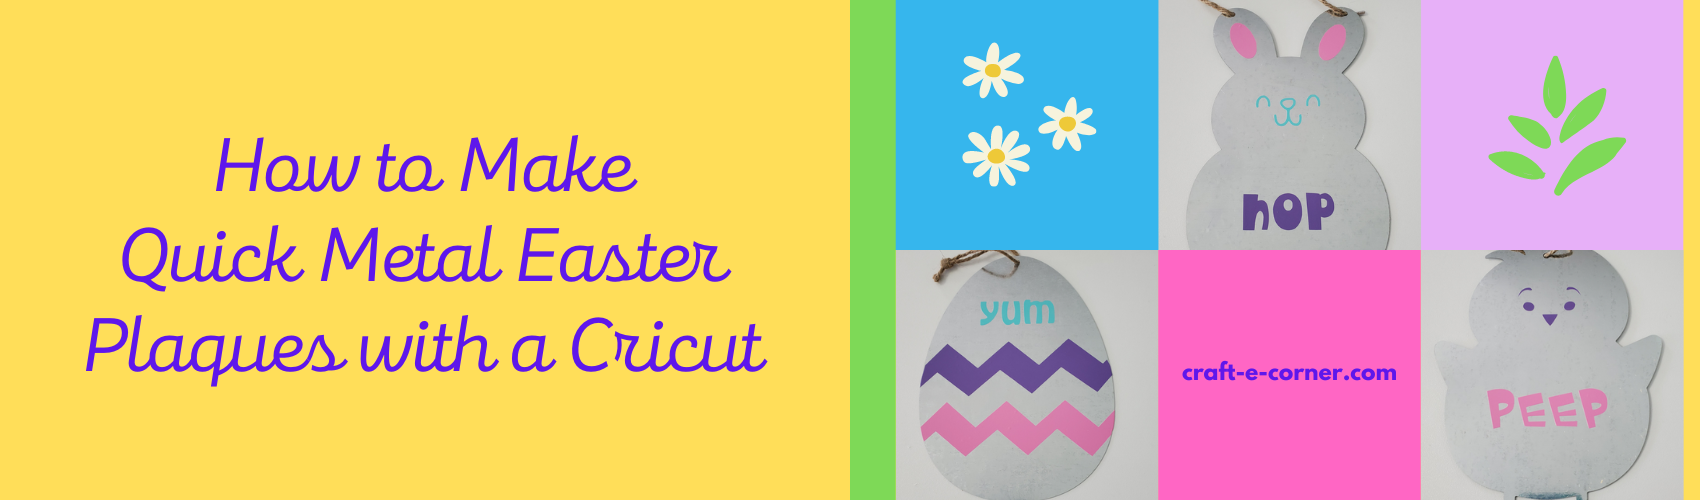 How to Make Quick Metal Easter Plaques with a Cricut